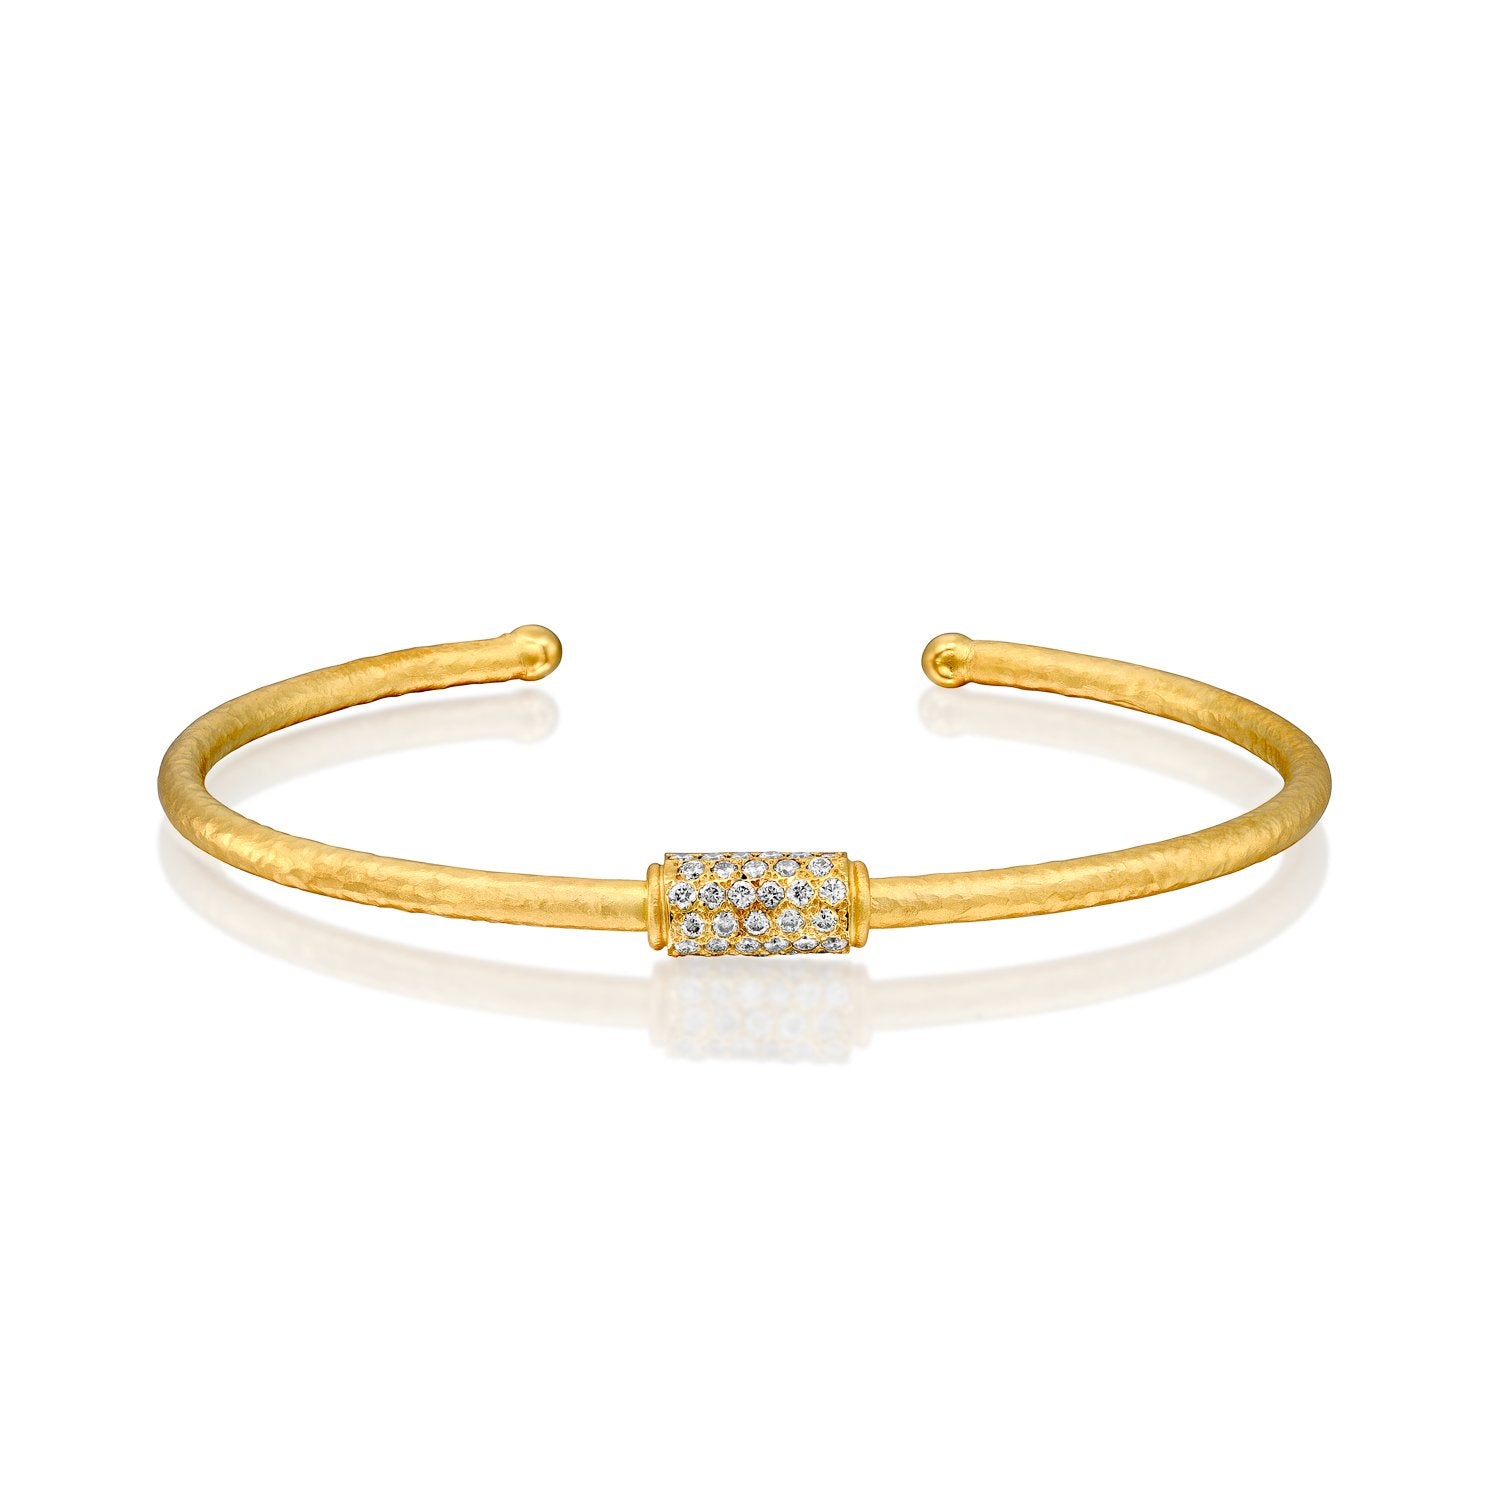 6549 - 14kt yellow gold hammered bracelet with white   diamond pave